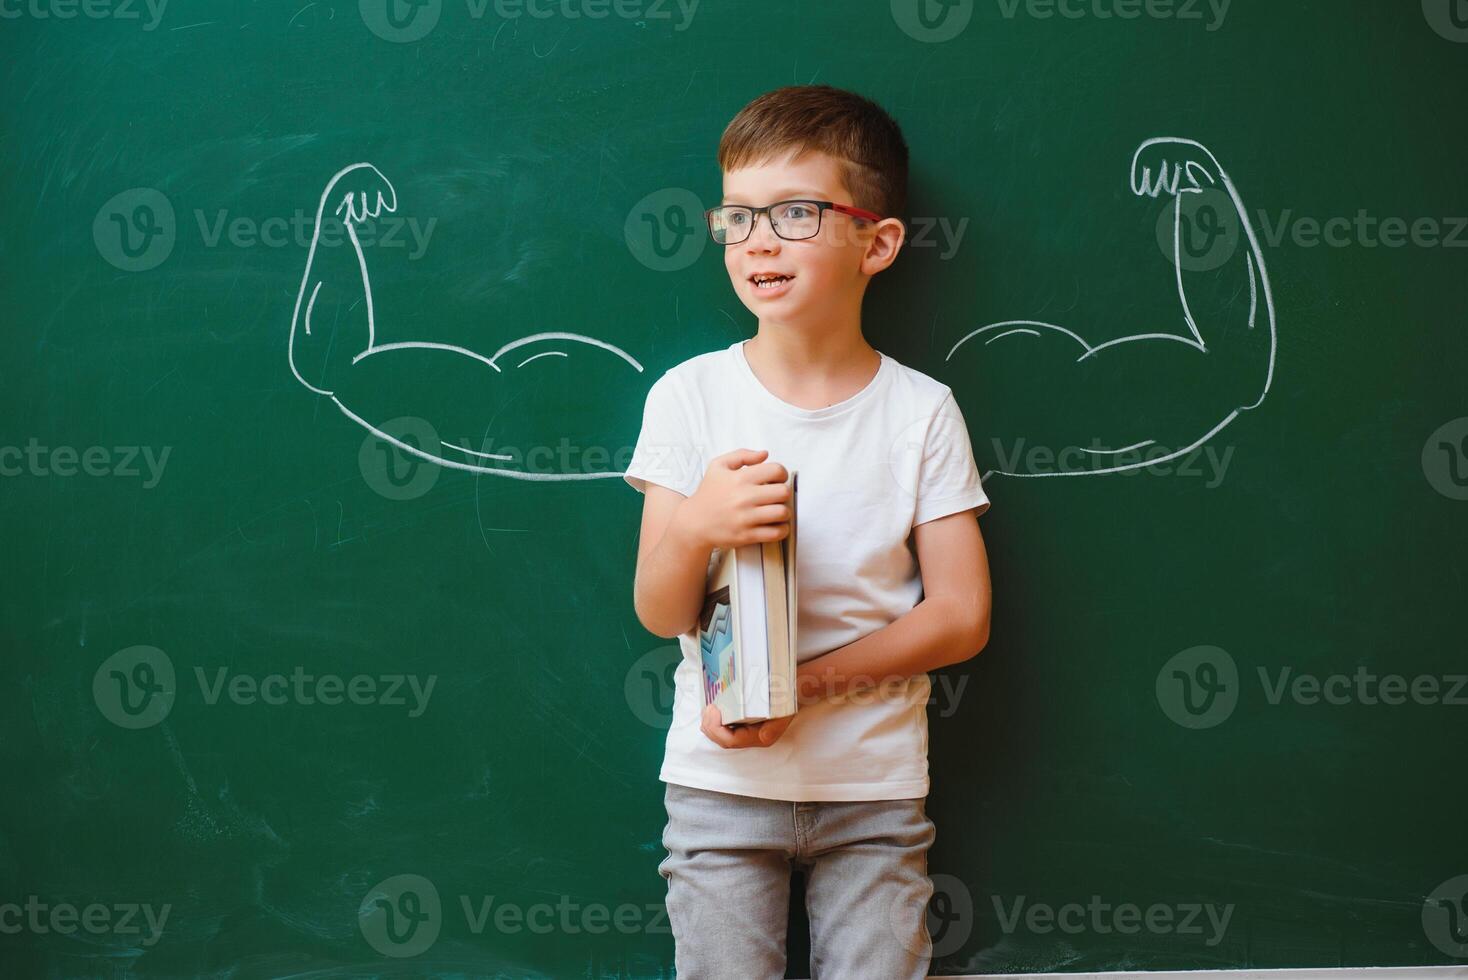 Cute child boy in school uniform and glasses. Go to school for the first time. Child with school bag and books. Kid in class room near chalkboard with muscles on it. Back to school photo